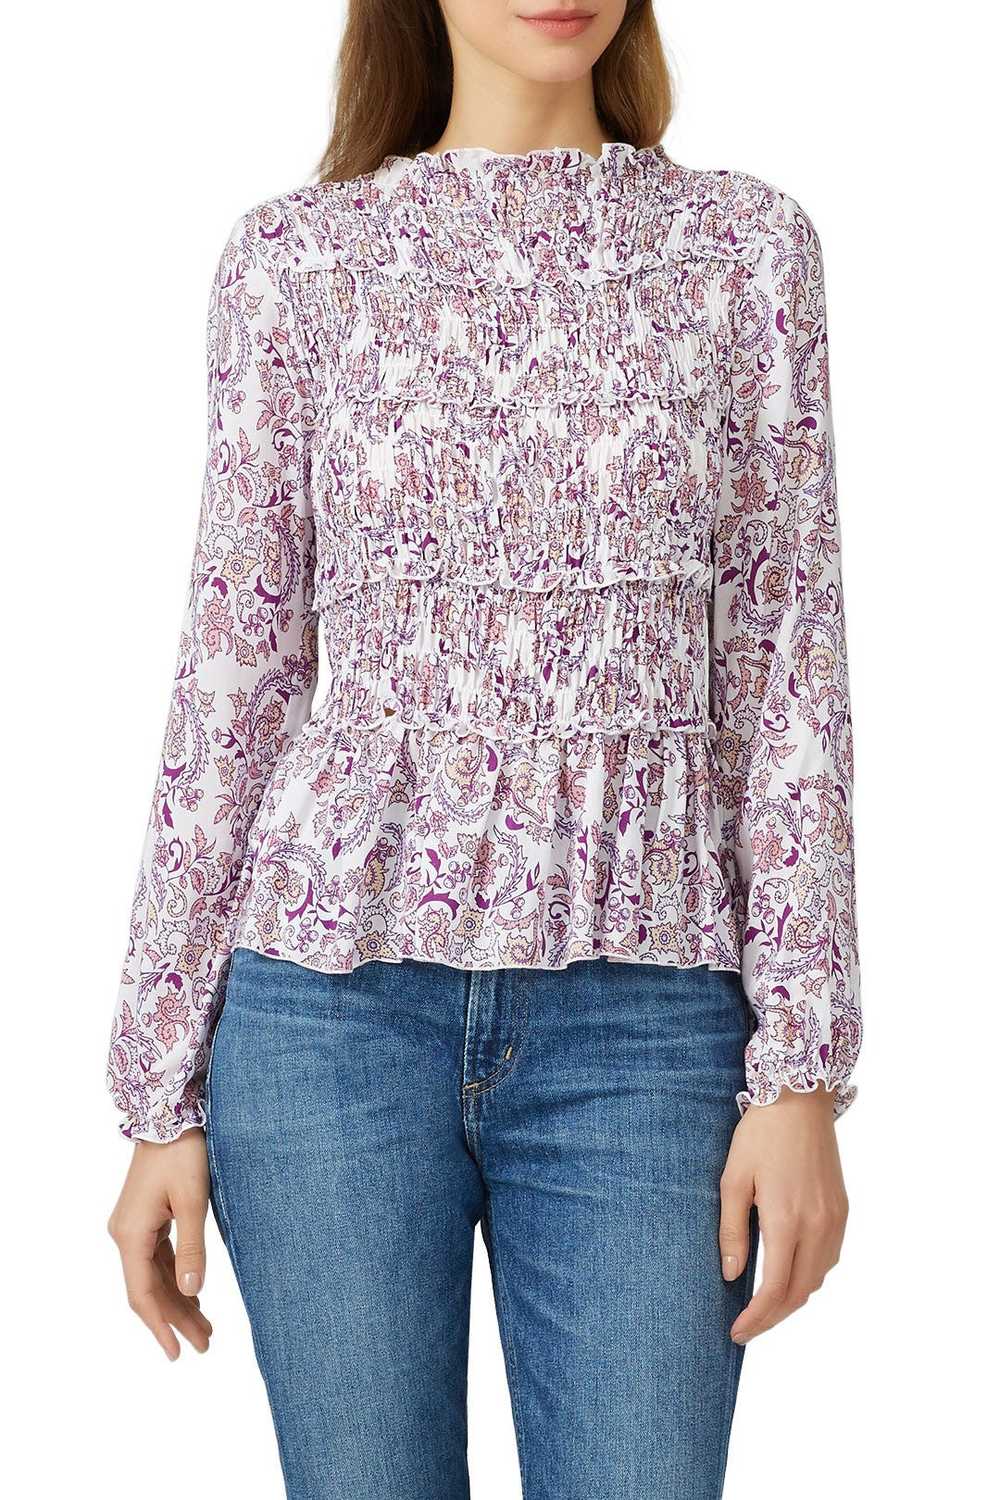 See by Chloé Long Sleeve Ruffle Top - image 2